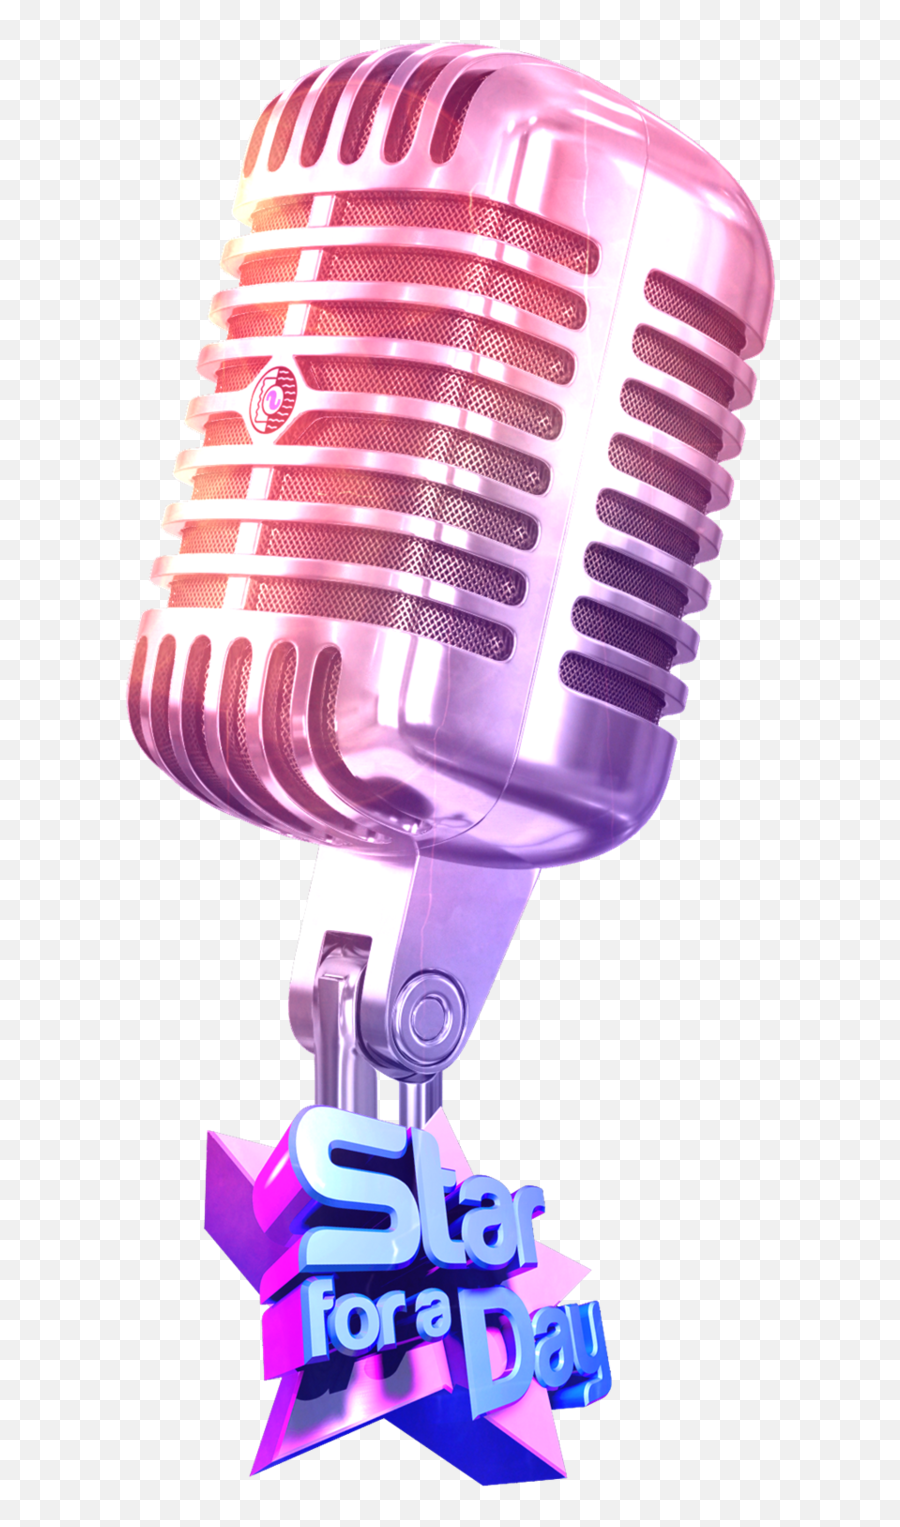 Download Free Png Microphone Png Transparent 83 Images In - Radio Mic Emoji,Microphone Transparent Background